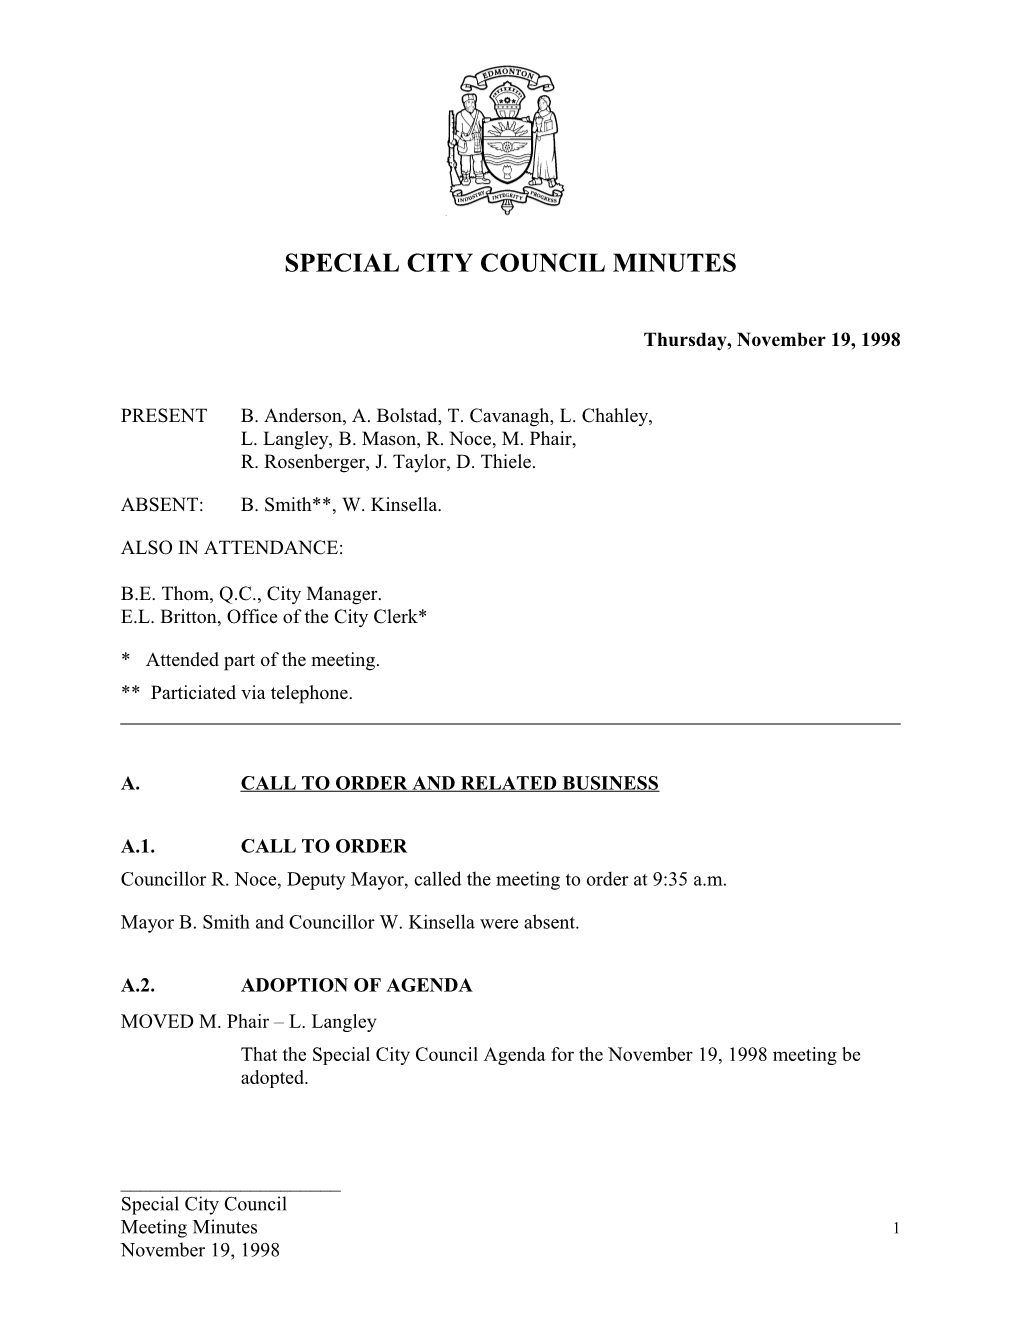 Minutes for City Council November 19, 1998 Meeting